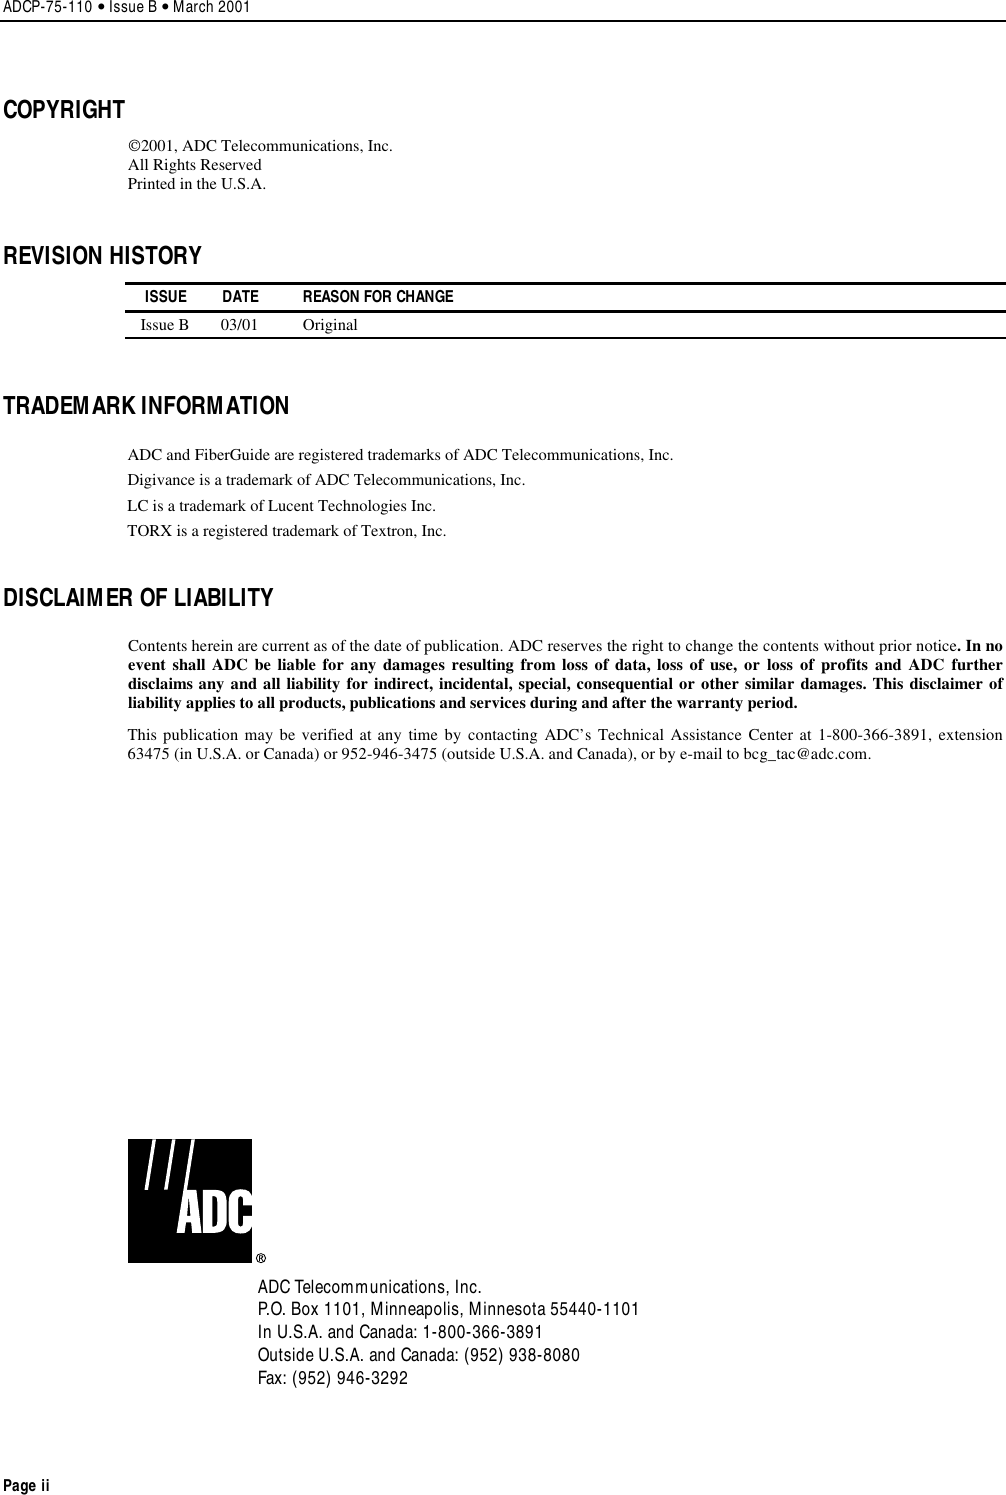 ADCP-75-110 • Issue B • March 2001Page iiCOPYRIGHT2001, ADC Telecommunications, Inc.All Rights ReservedPrinted in the U.S.A.REVISION HISTORYISSUE DATE REASON FOR CHANGEIssue B 03/01 OriginalTRADEMARK INFORMATIONADC and FiberGuide are registered trademarks of ADC Telecommunications, Inc.Digivance is a trademark of ADC Telecommunications, Inc.LC is a trademark of Lucent Technologies Inc.TORX is a registered trademark of Textron, Inc.DISCLAIMER OF LIABILITYContents herein are current as of the date of publication. ADC reserves the right to change the contents without prior notice.In noevent shall ADC be liable for any damages resulting from loss of data, loss of use, or loss of profits and ADC furtherdisclaims any and all liability for indirect, incidental, special, consequential or other similar damages. This disclaimer ofliability applies to all products, publications and services during and after the warranty period.This publication may be verified at any time by contacting ADC’s Technical Assistance Center at 1-800-366-3891, extension63475 (in U.S.A. or Canada) or 952-946-3475 (outside U.S.A. and Canada), or by e-mail to bcg_tac@adc.com.ADC Telecommunications, Inc.P.O. Box 1101, Minneapolis, Minnesota 55440-1101In U.S.A. and Canada: 1-800-366-3891Outside U.S.A. and Canada: (952) 938-8080Fax: (952) 946-3292